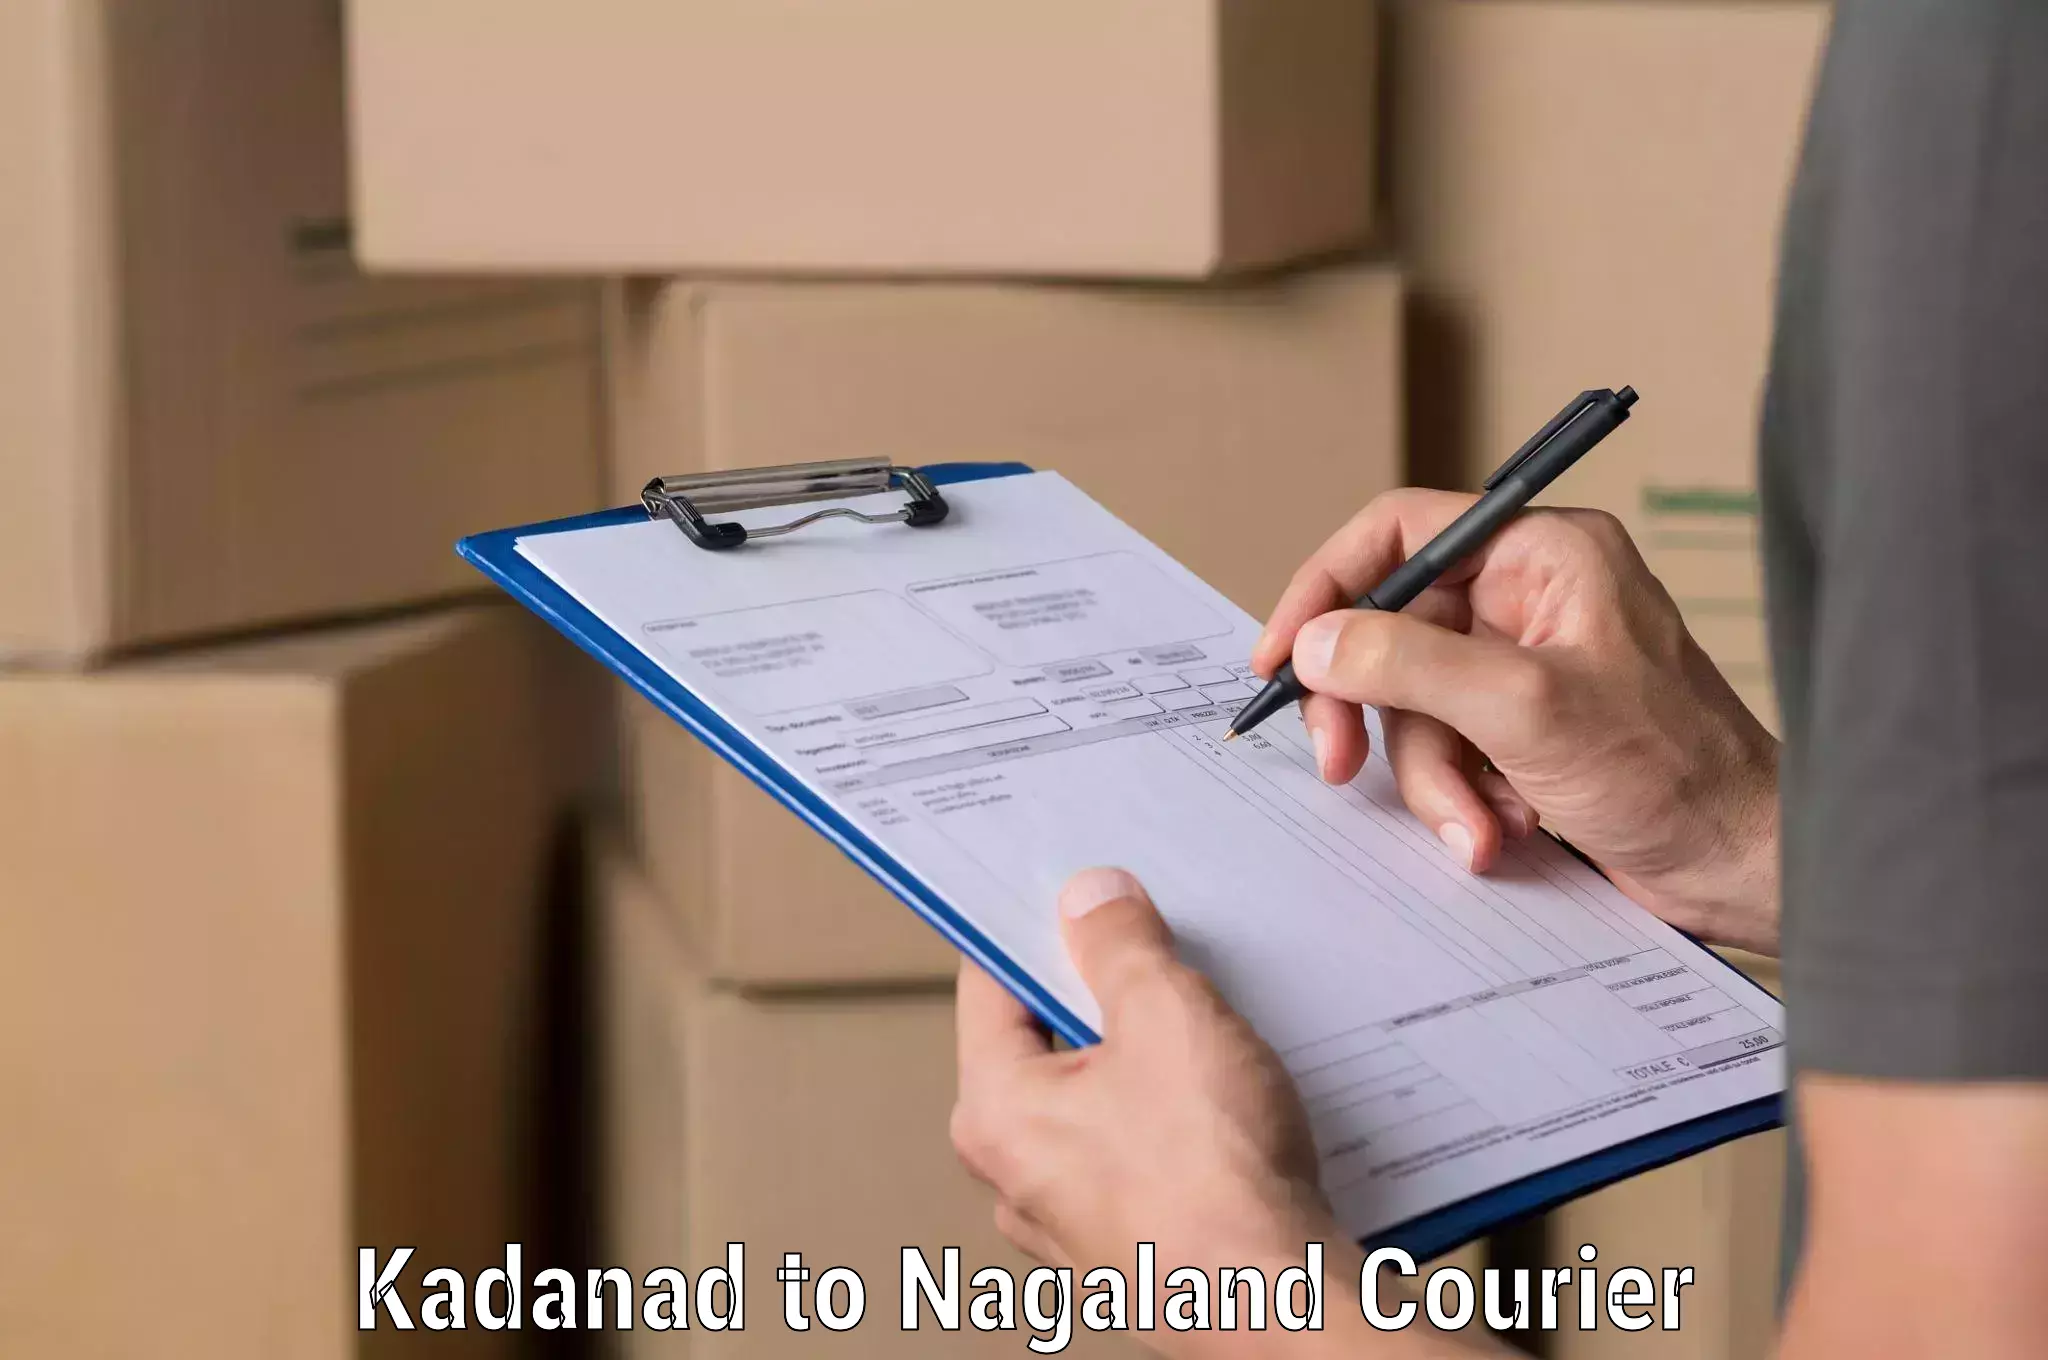 Package delivery network Kadanad to Dimapur